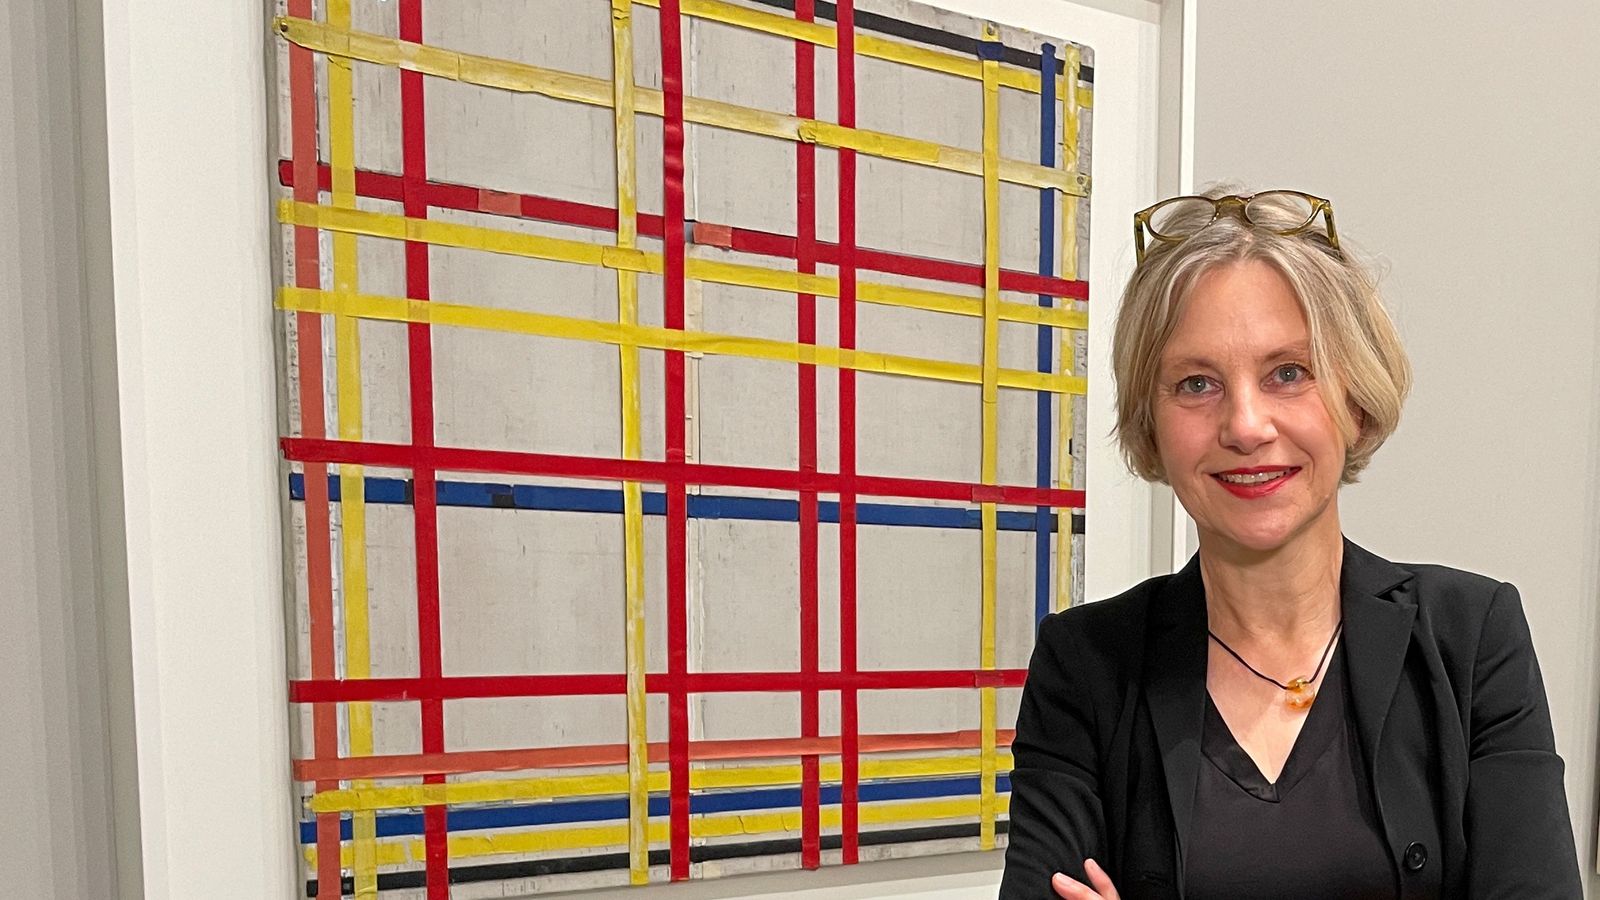 Curator Susanne Meyer-Bueser poses in front of the Piet Mondrian painting "New York City I" in the Kunstsammlung NRW after it has been hanging upside down for 77 years in Duesseldorf, Germany, October 28, 2022. REUTERS/Petra Wischgoll NO RESALES. NO ARCHIVES